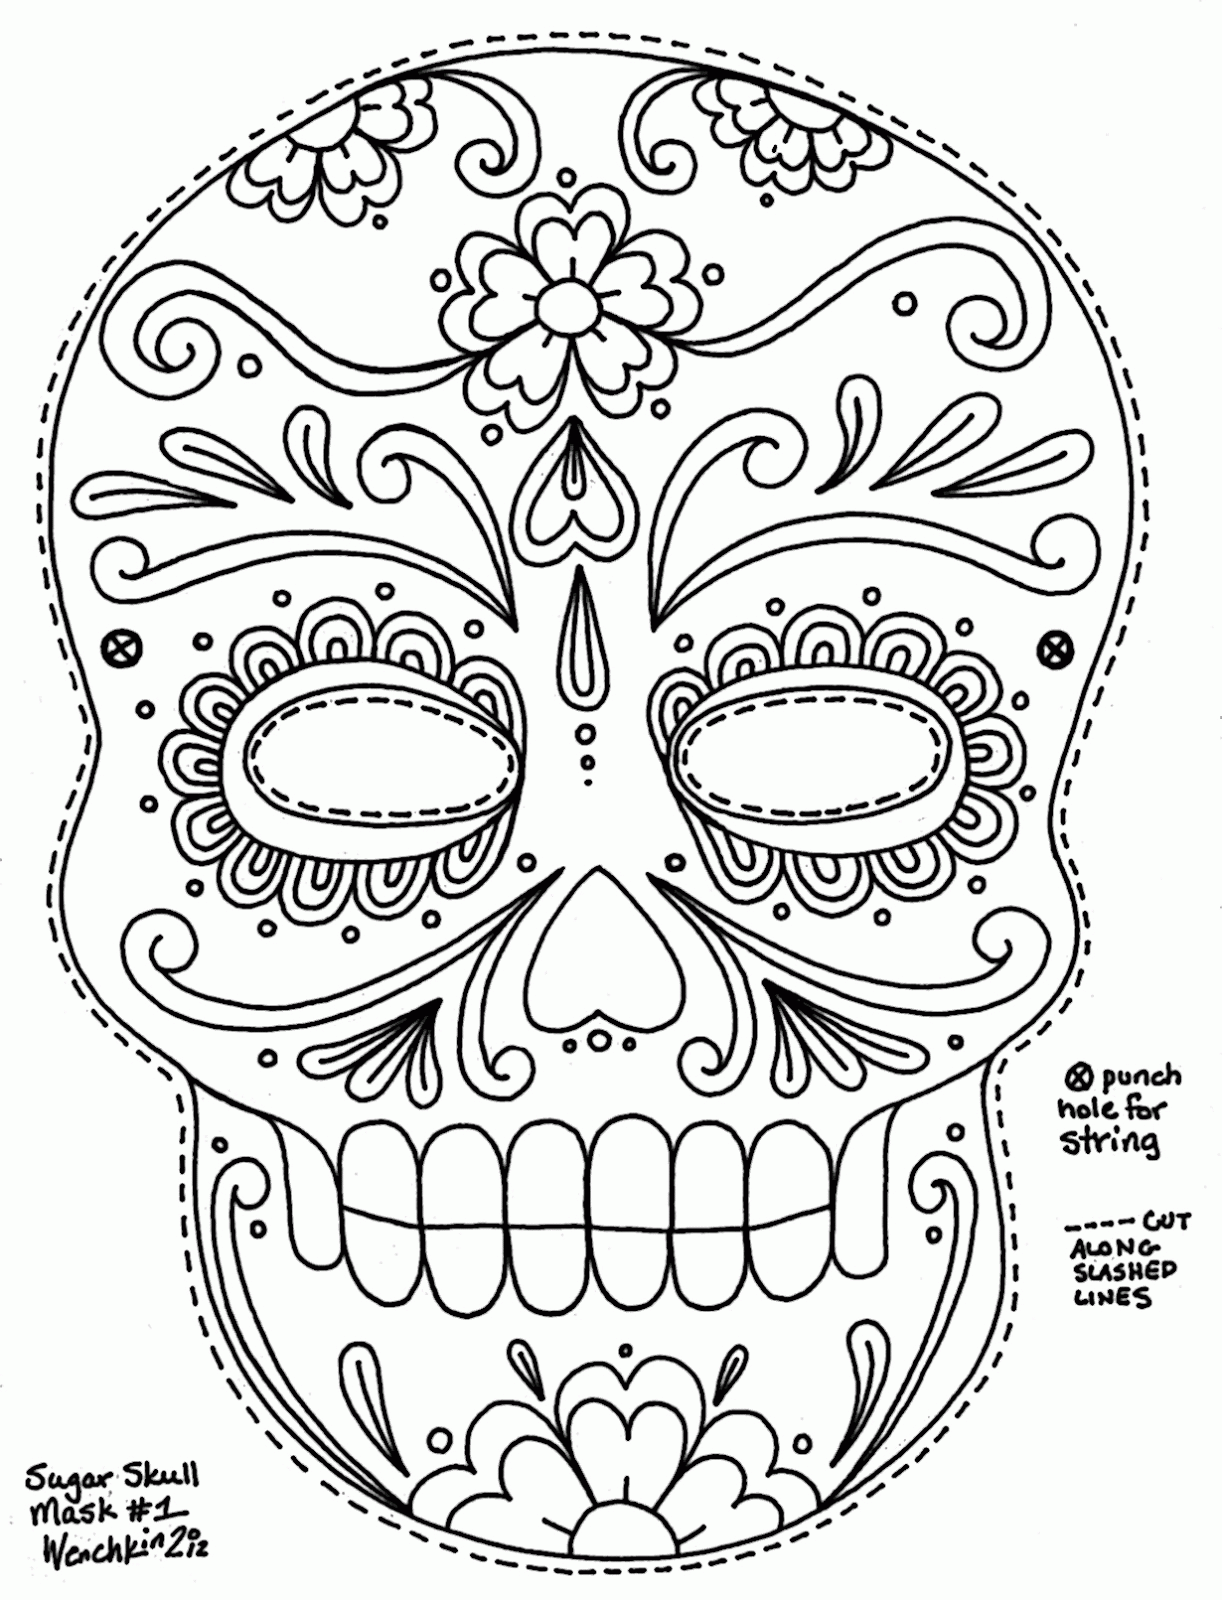 coloring pages of sugar skulls - High Quality Coloring Pages